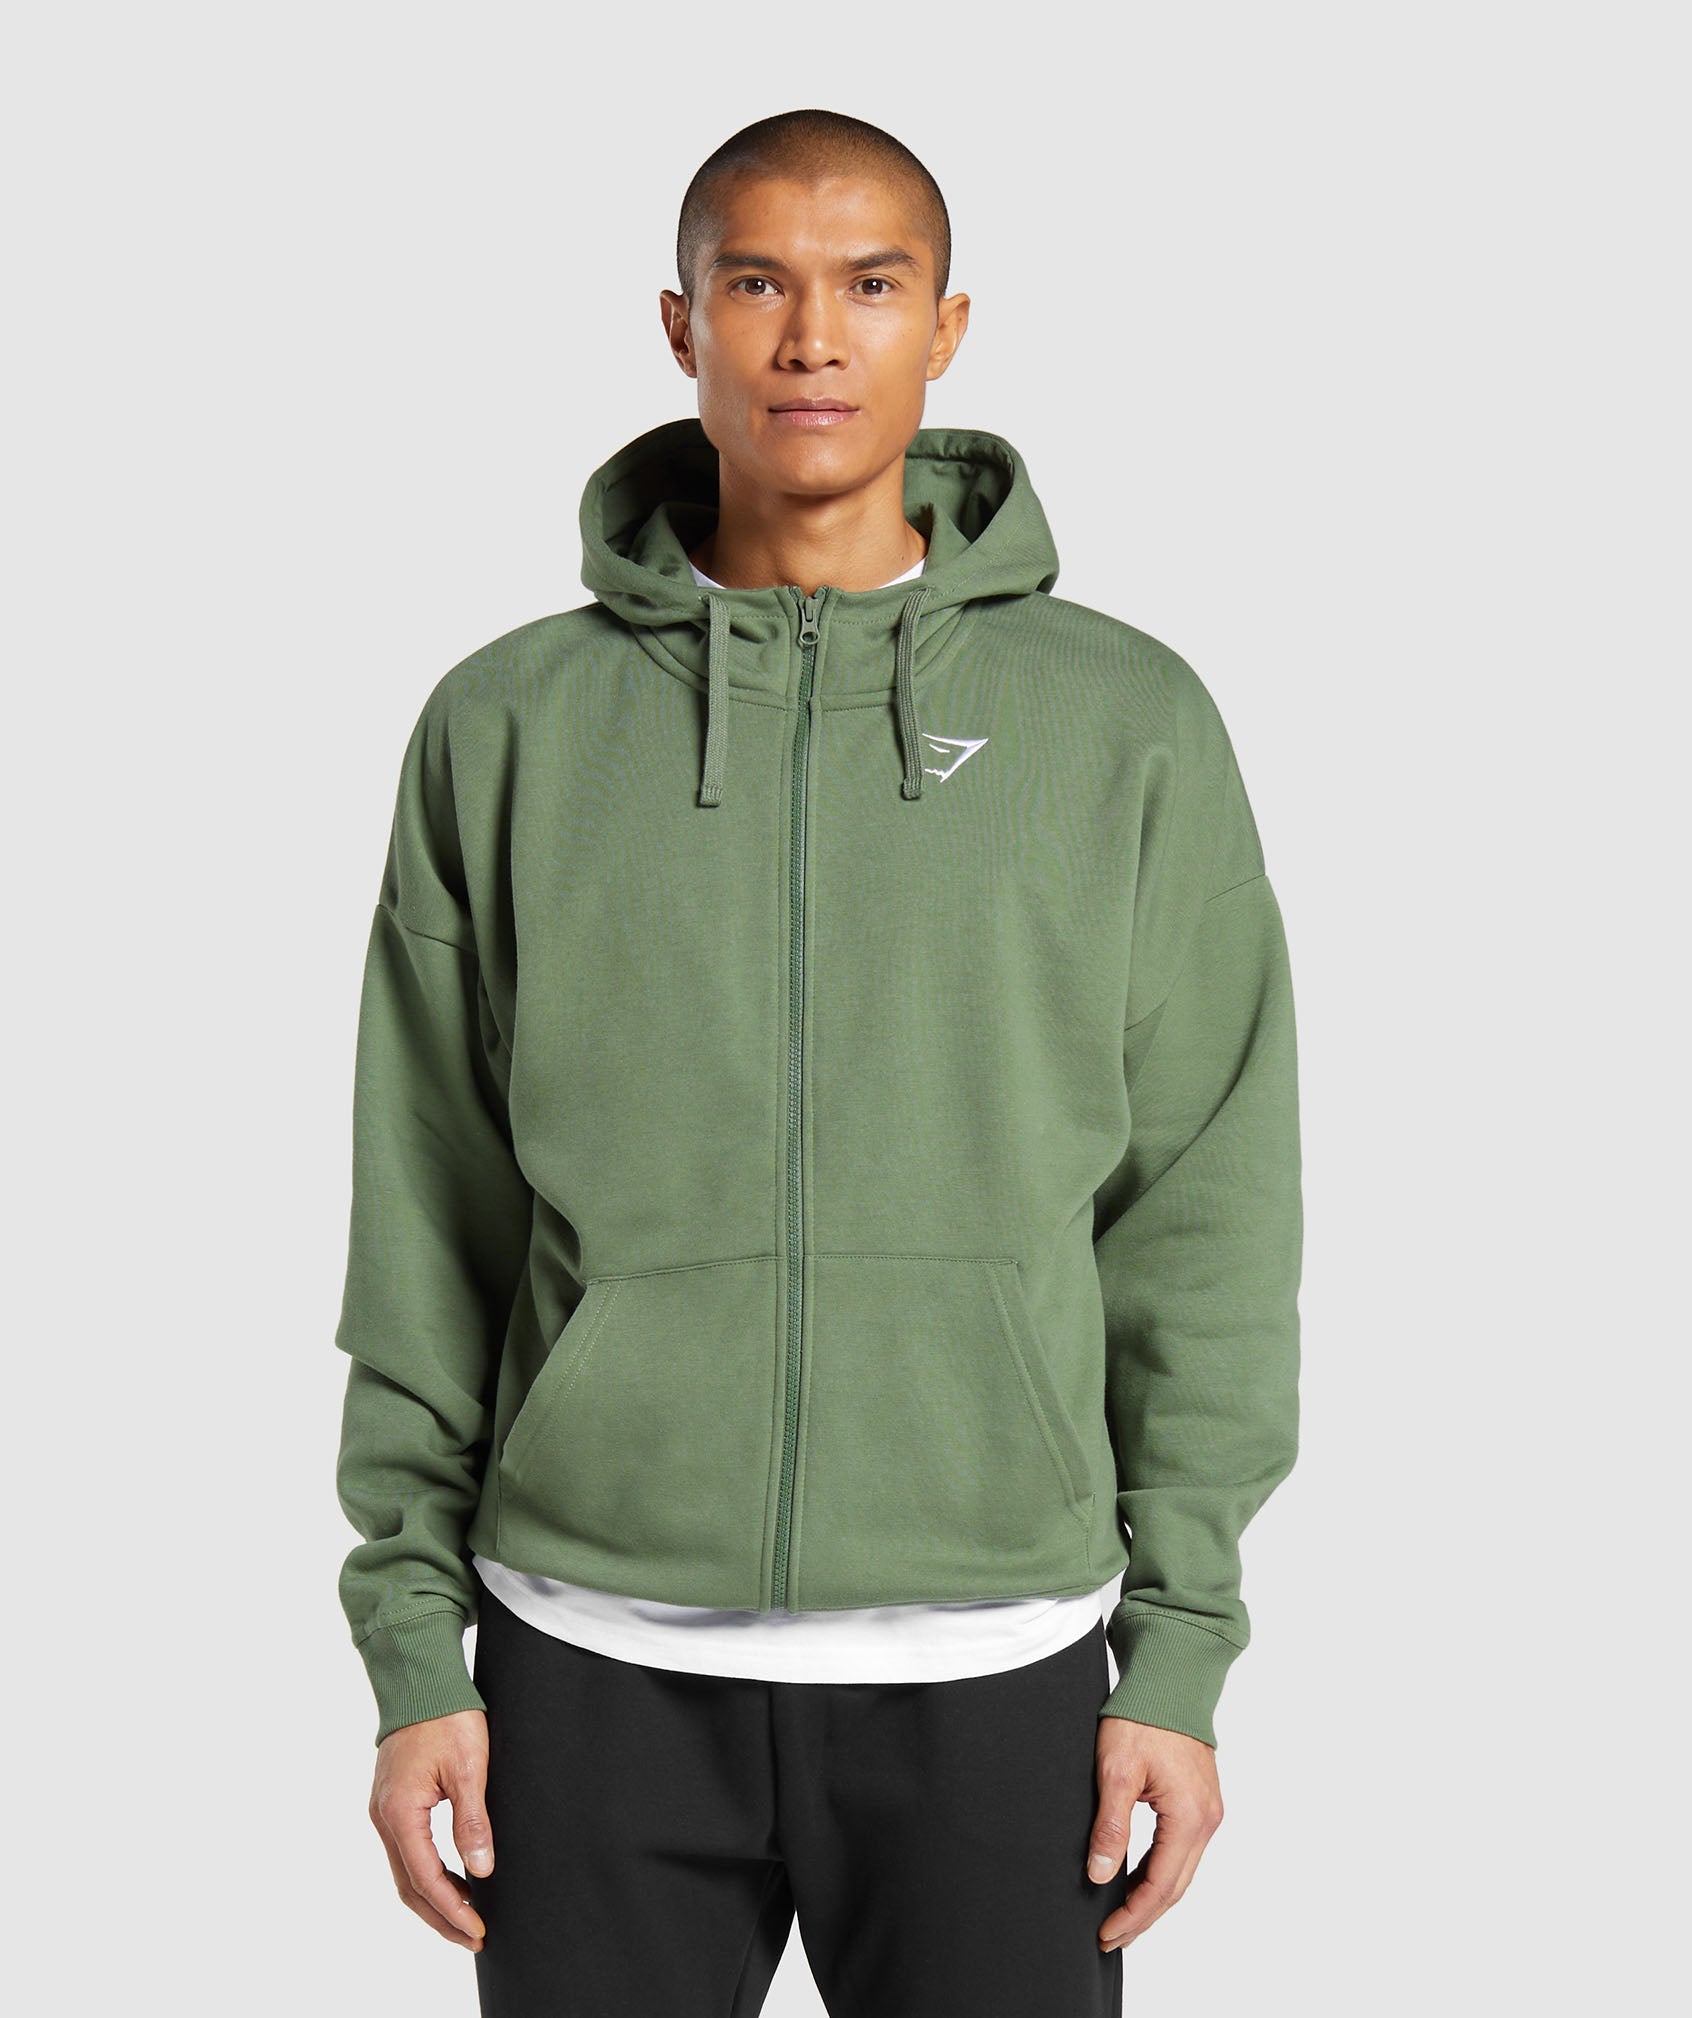 Crest Oversized Zip Up Hoodie in {{variantColor} is out of stock